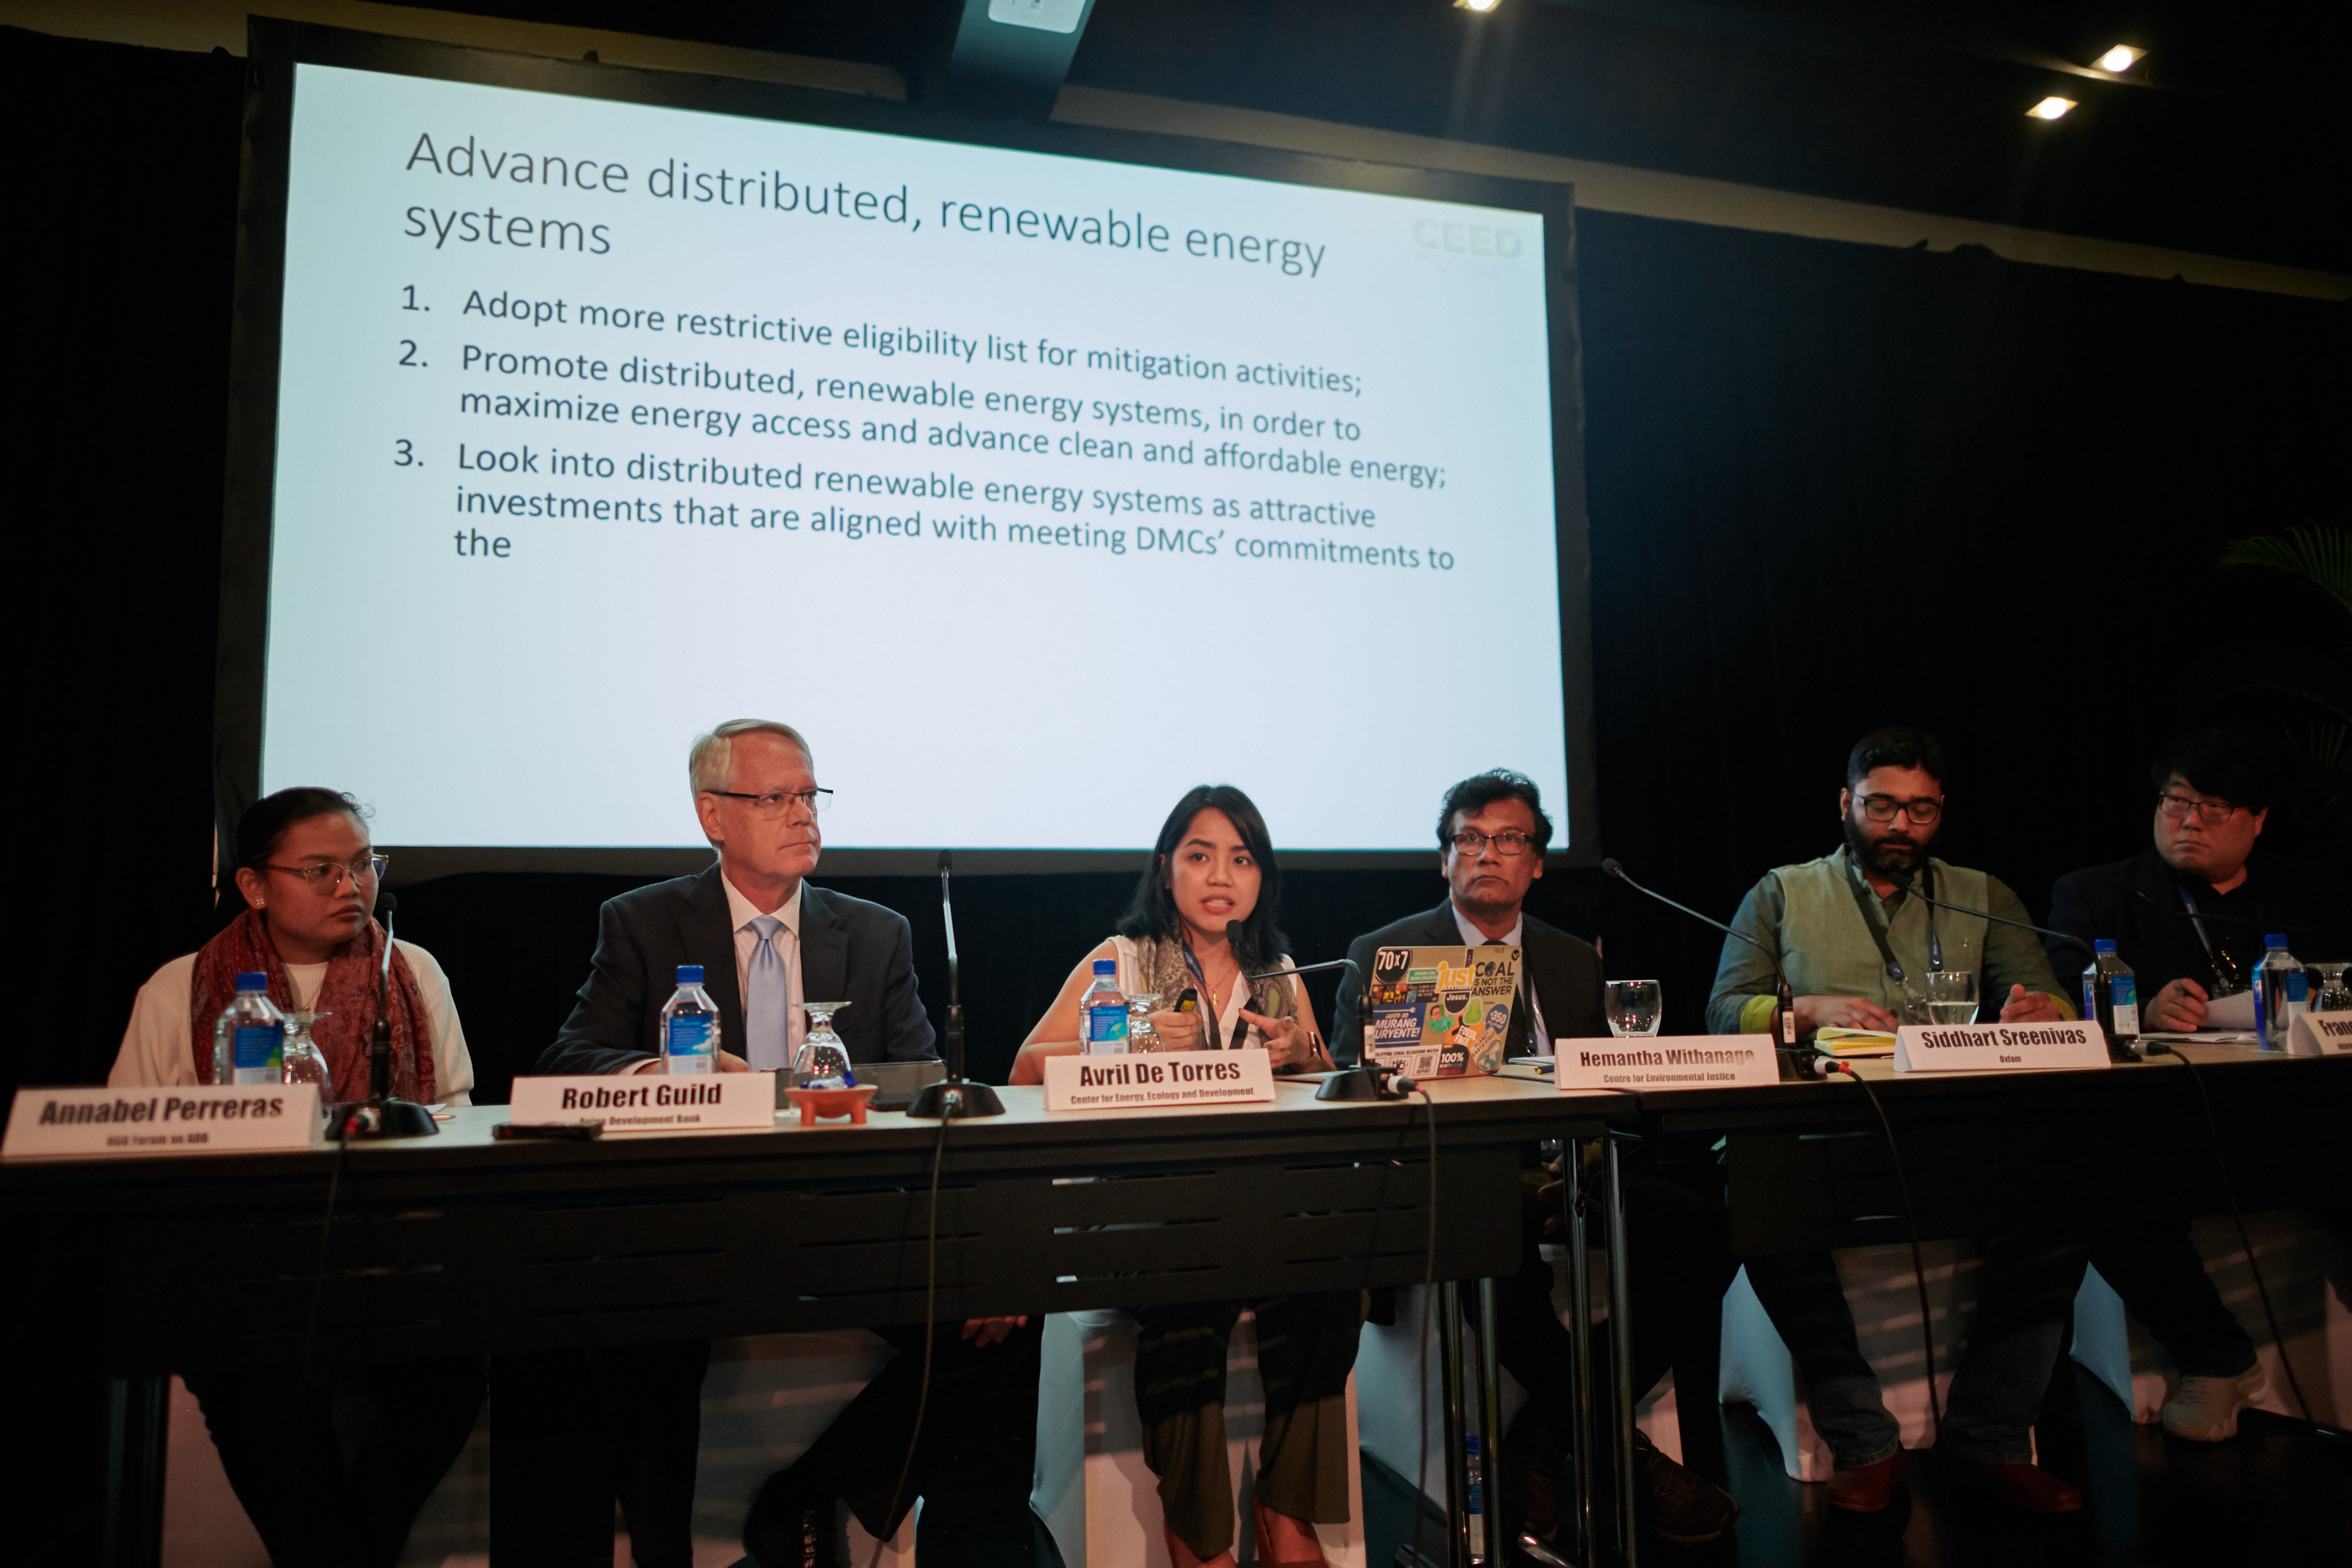 Impact of ADB's Energy Policy and the Paris Agreement